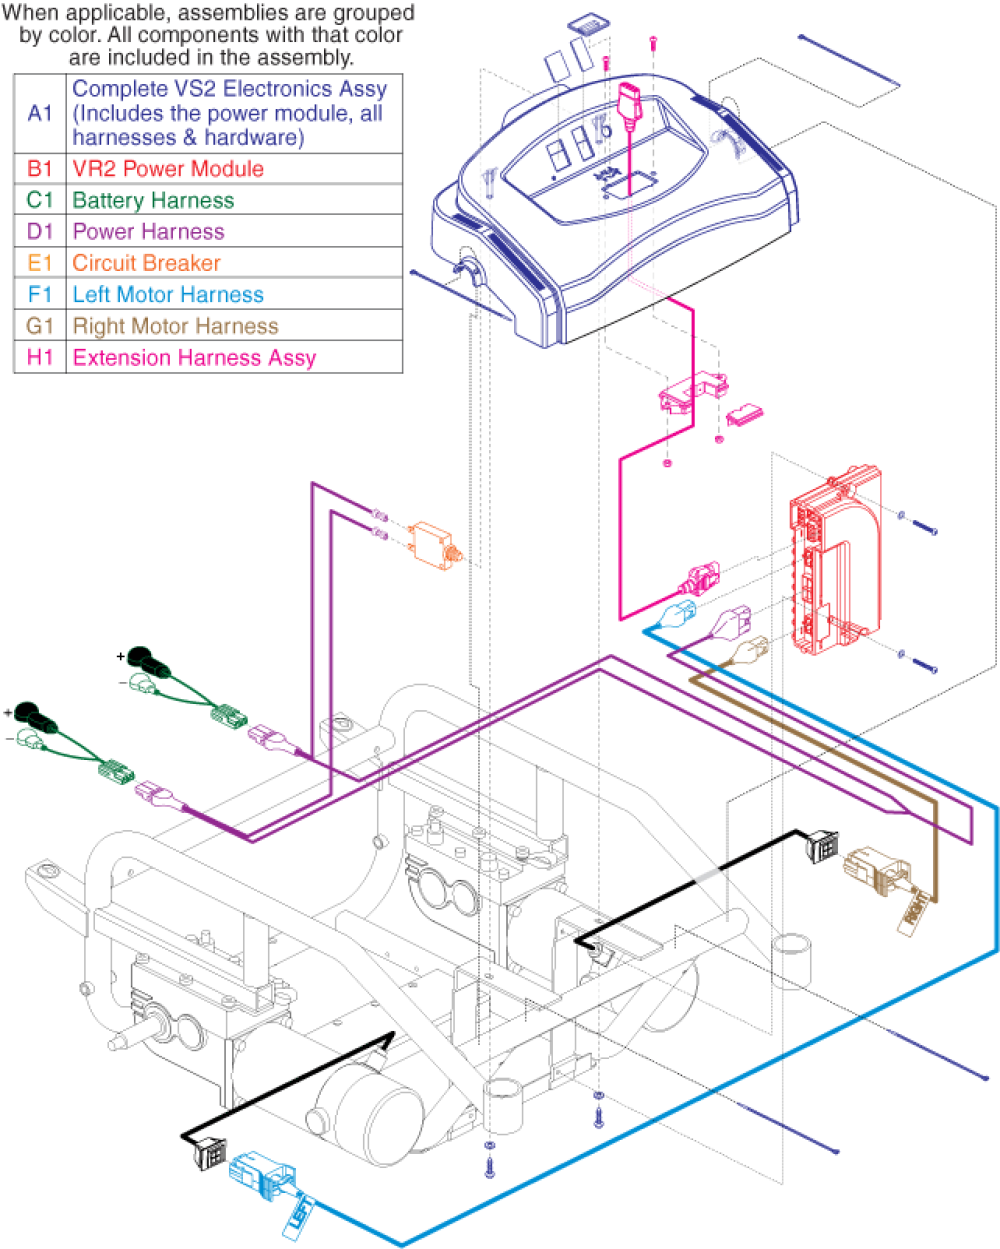 Utility Tray Assembly - Vr2 Off-board parts diagram